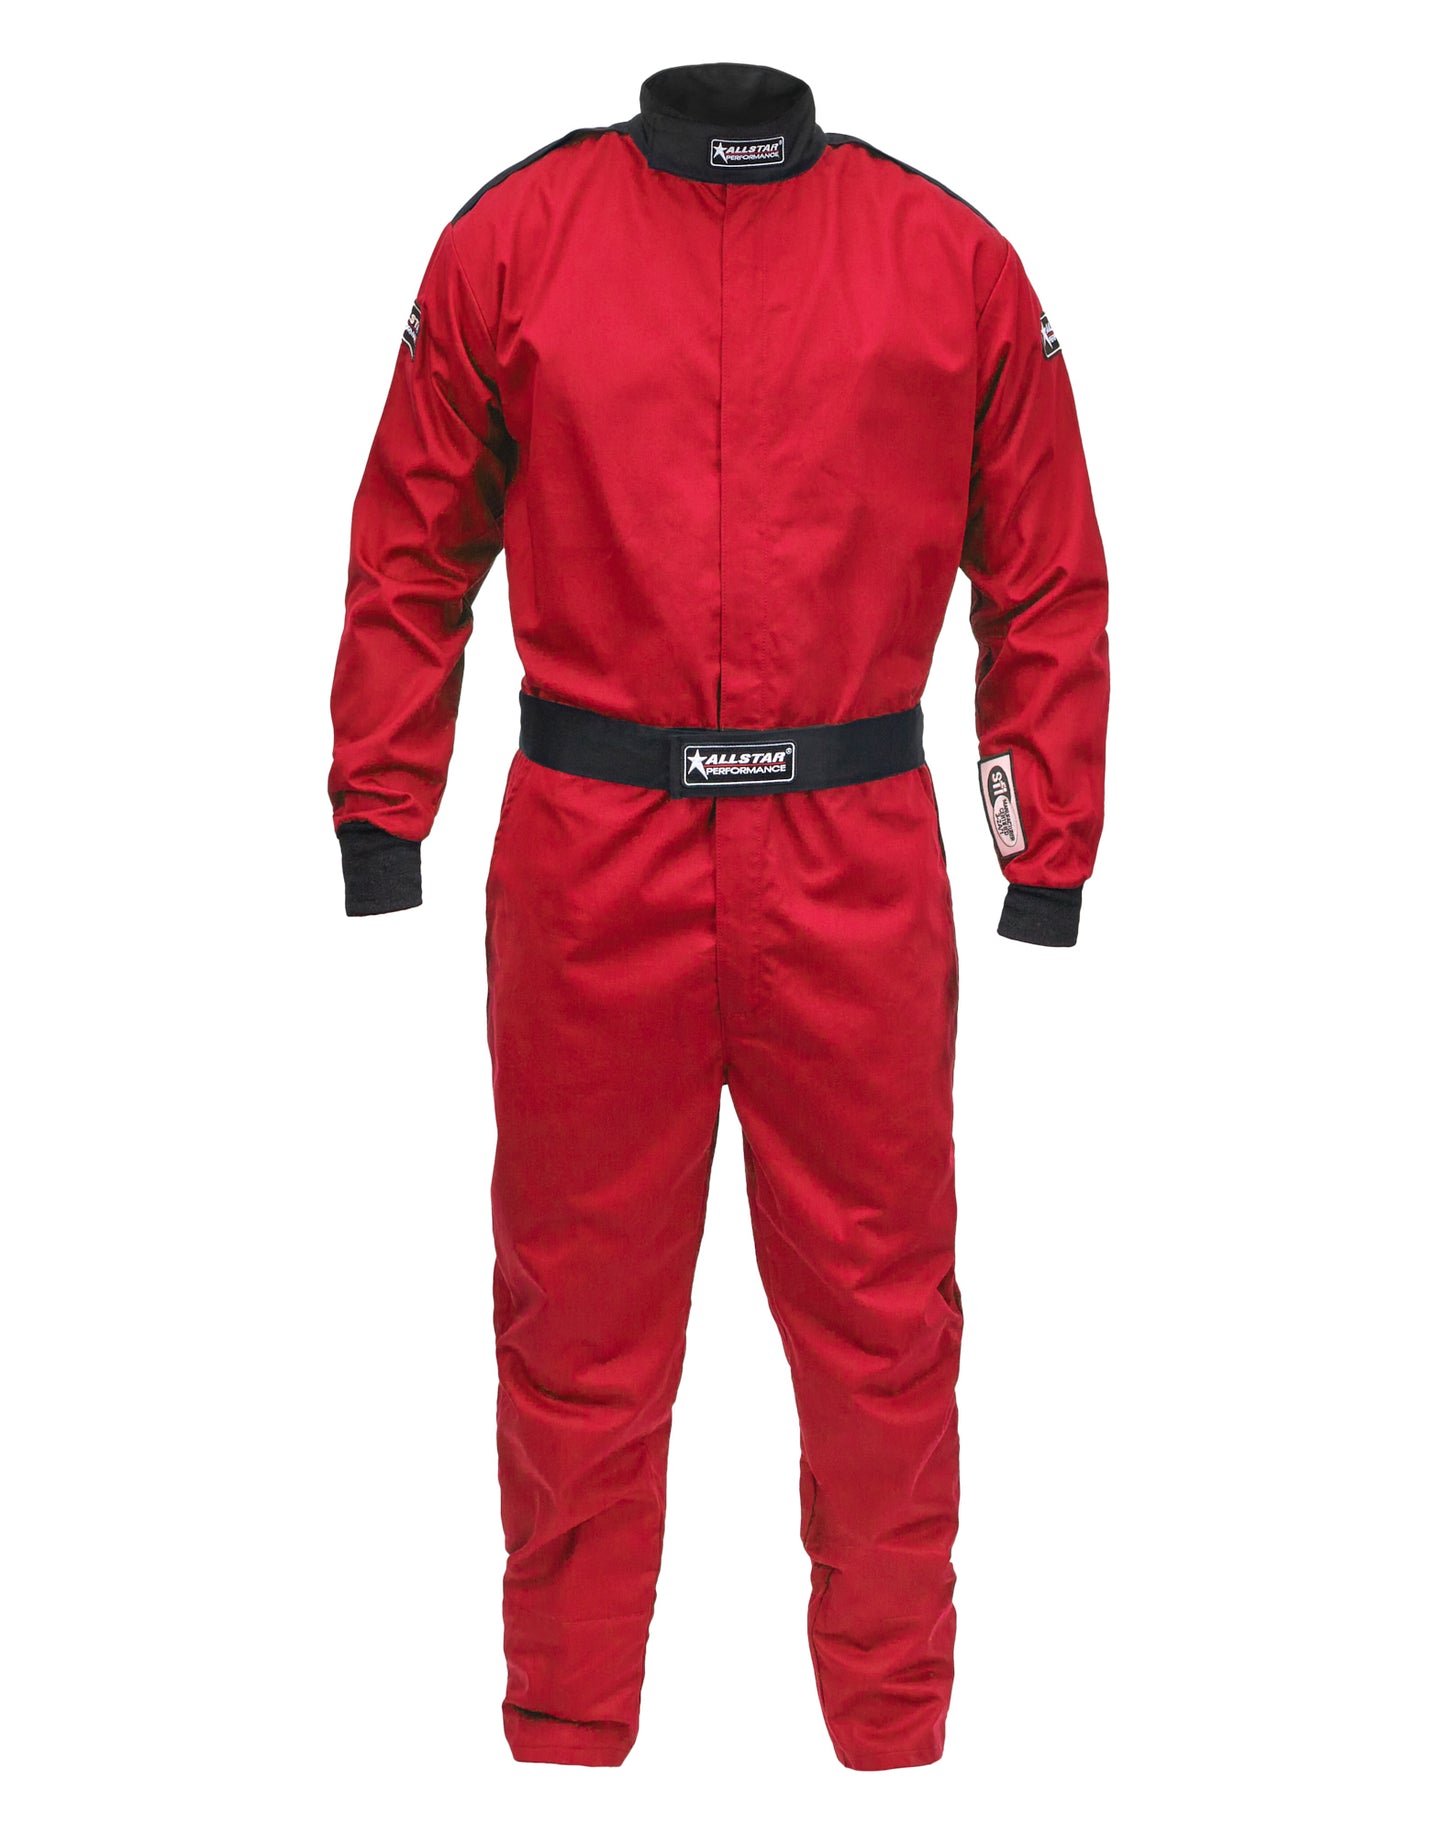 Racing Suit SFI 3.2A/1 S/L Red Small